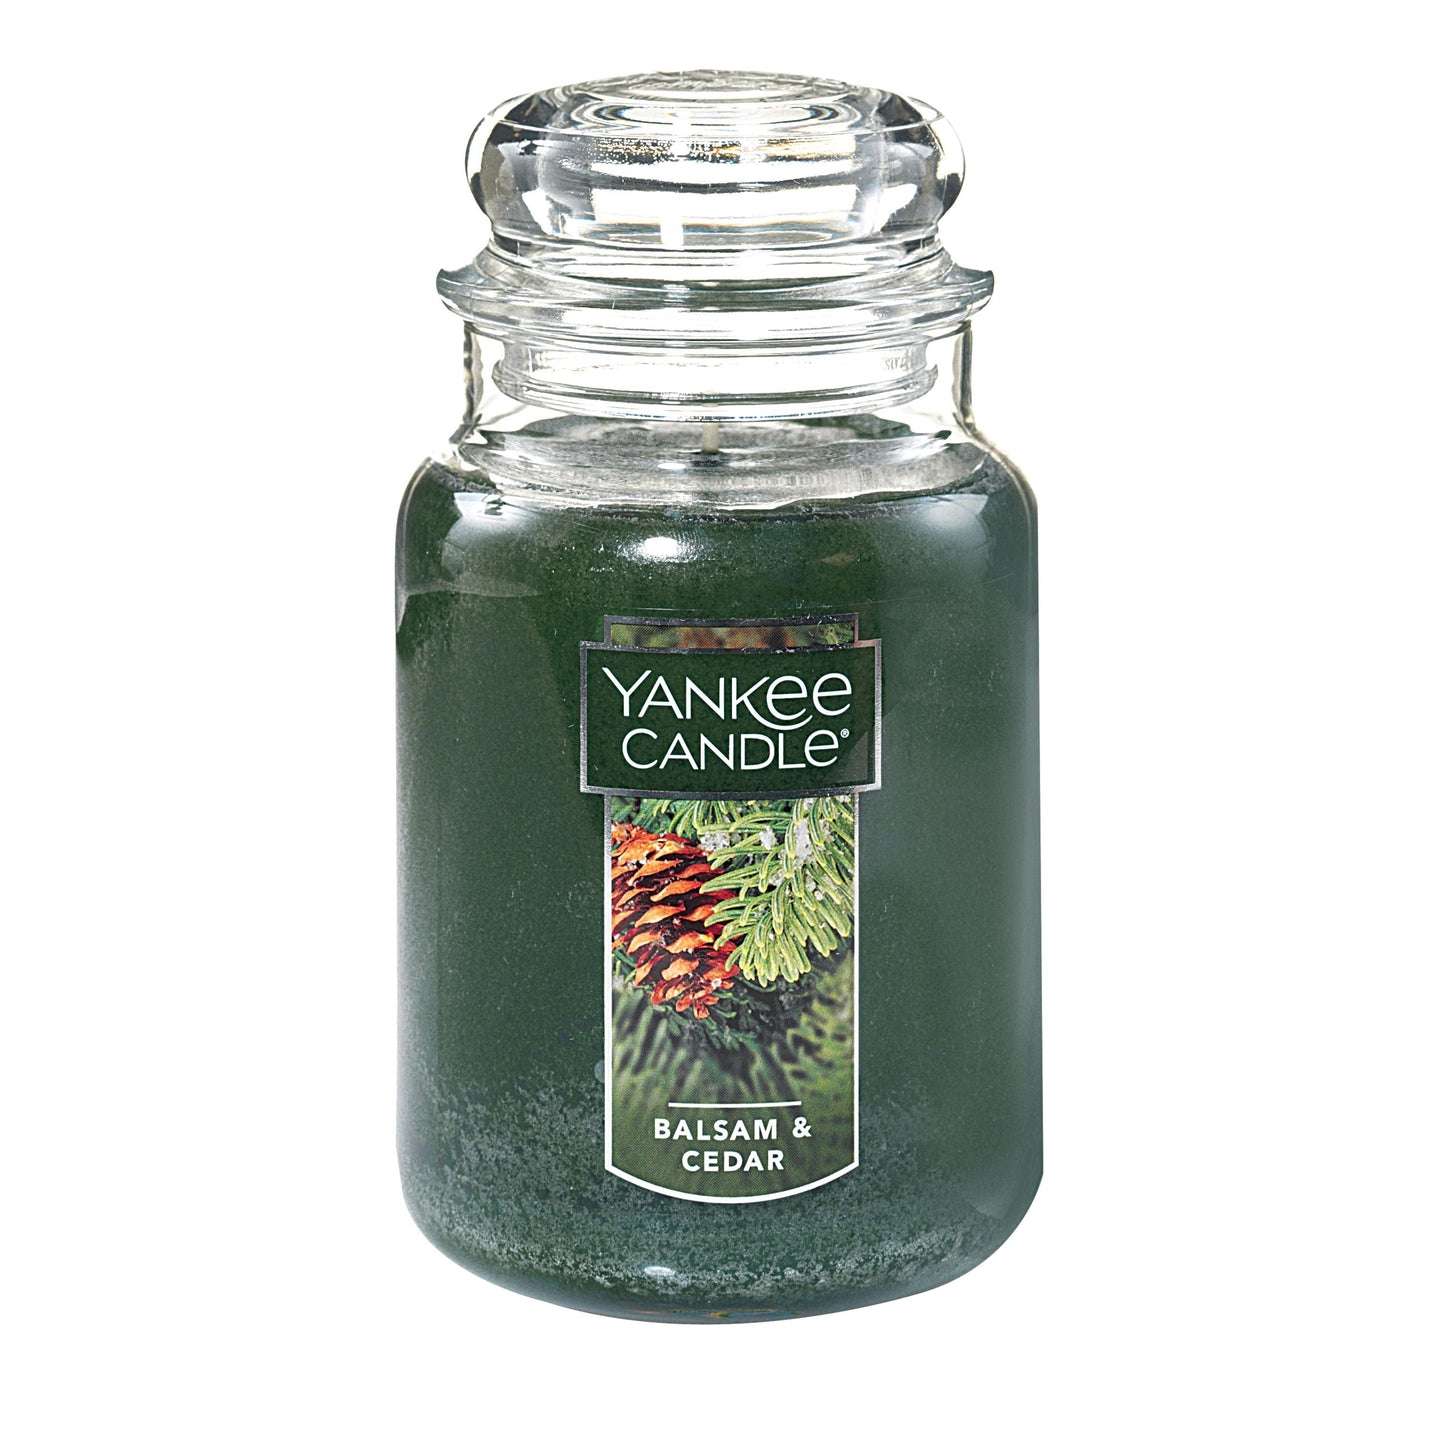 Yankee Candle Original Jar Candle - Balsam and Cedar - Large - Shelburne Country Store